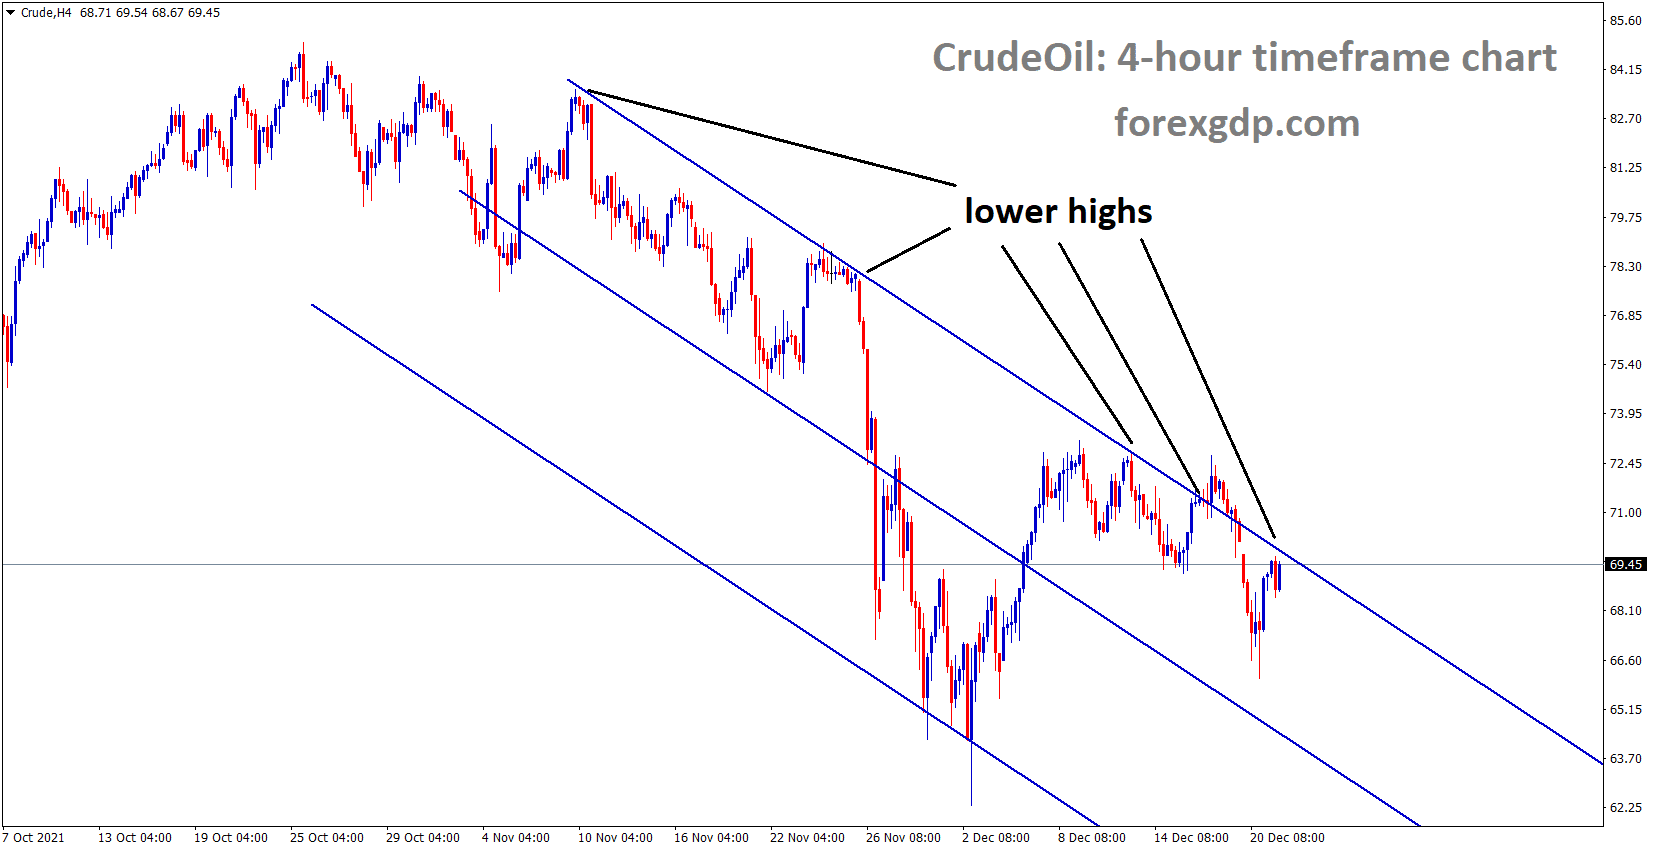 Crude oil is moving in the Descending channel and the reached the lower high area of the channel